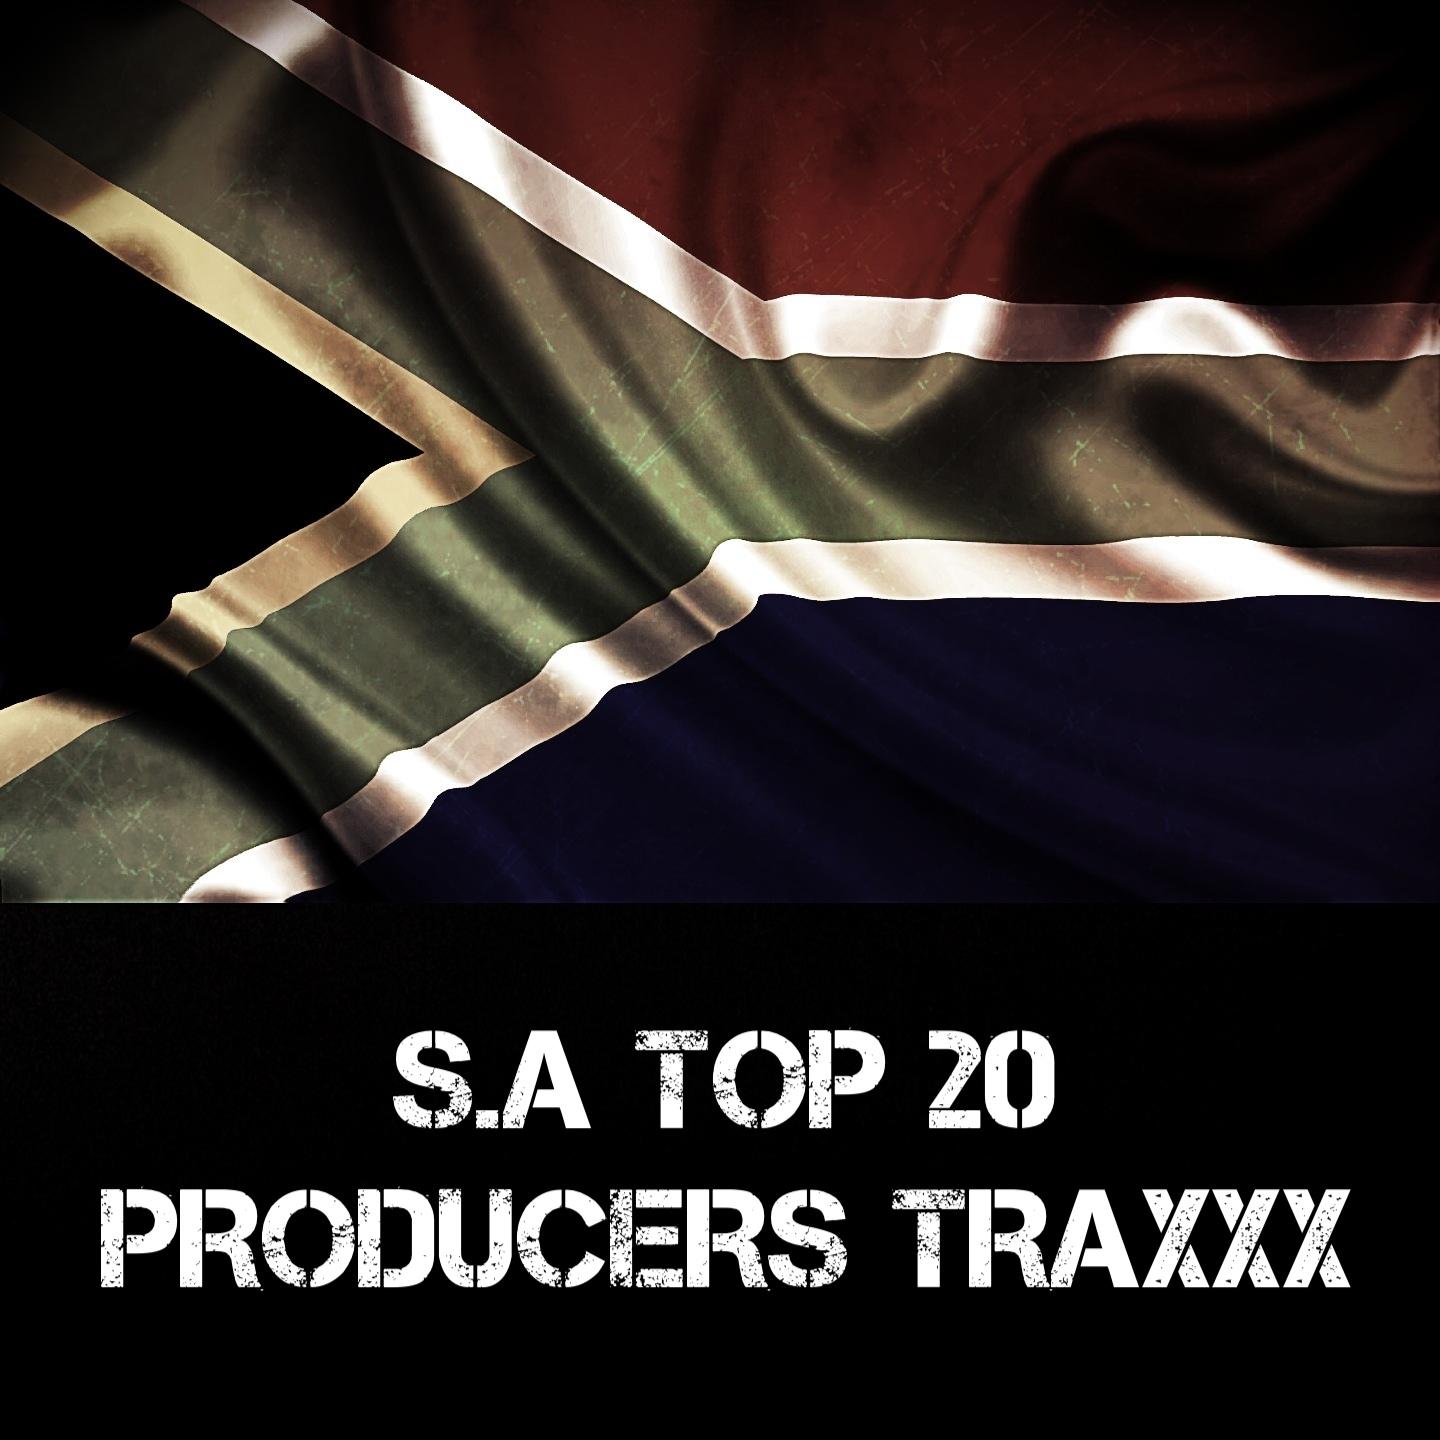 Постер альбома S.A TOP 20 PRODUCERS TRAXXX